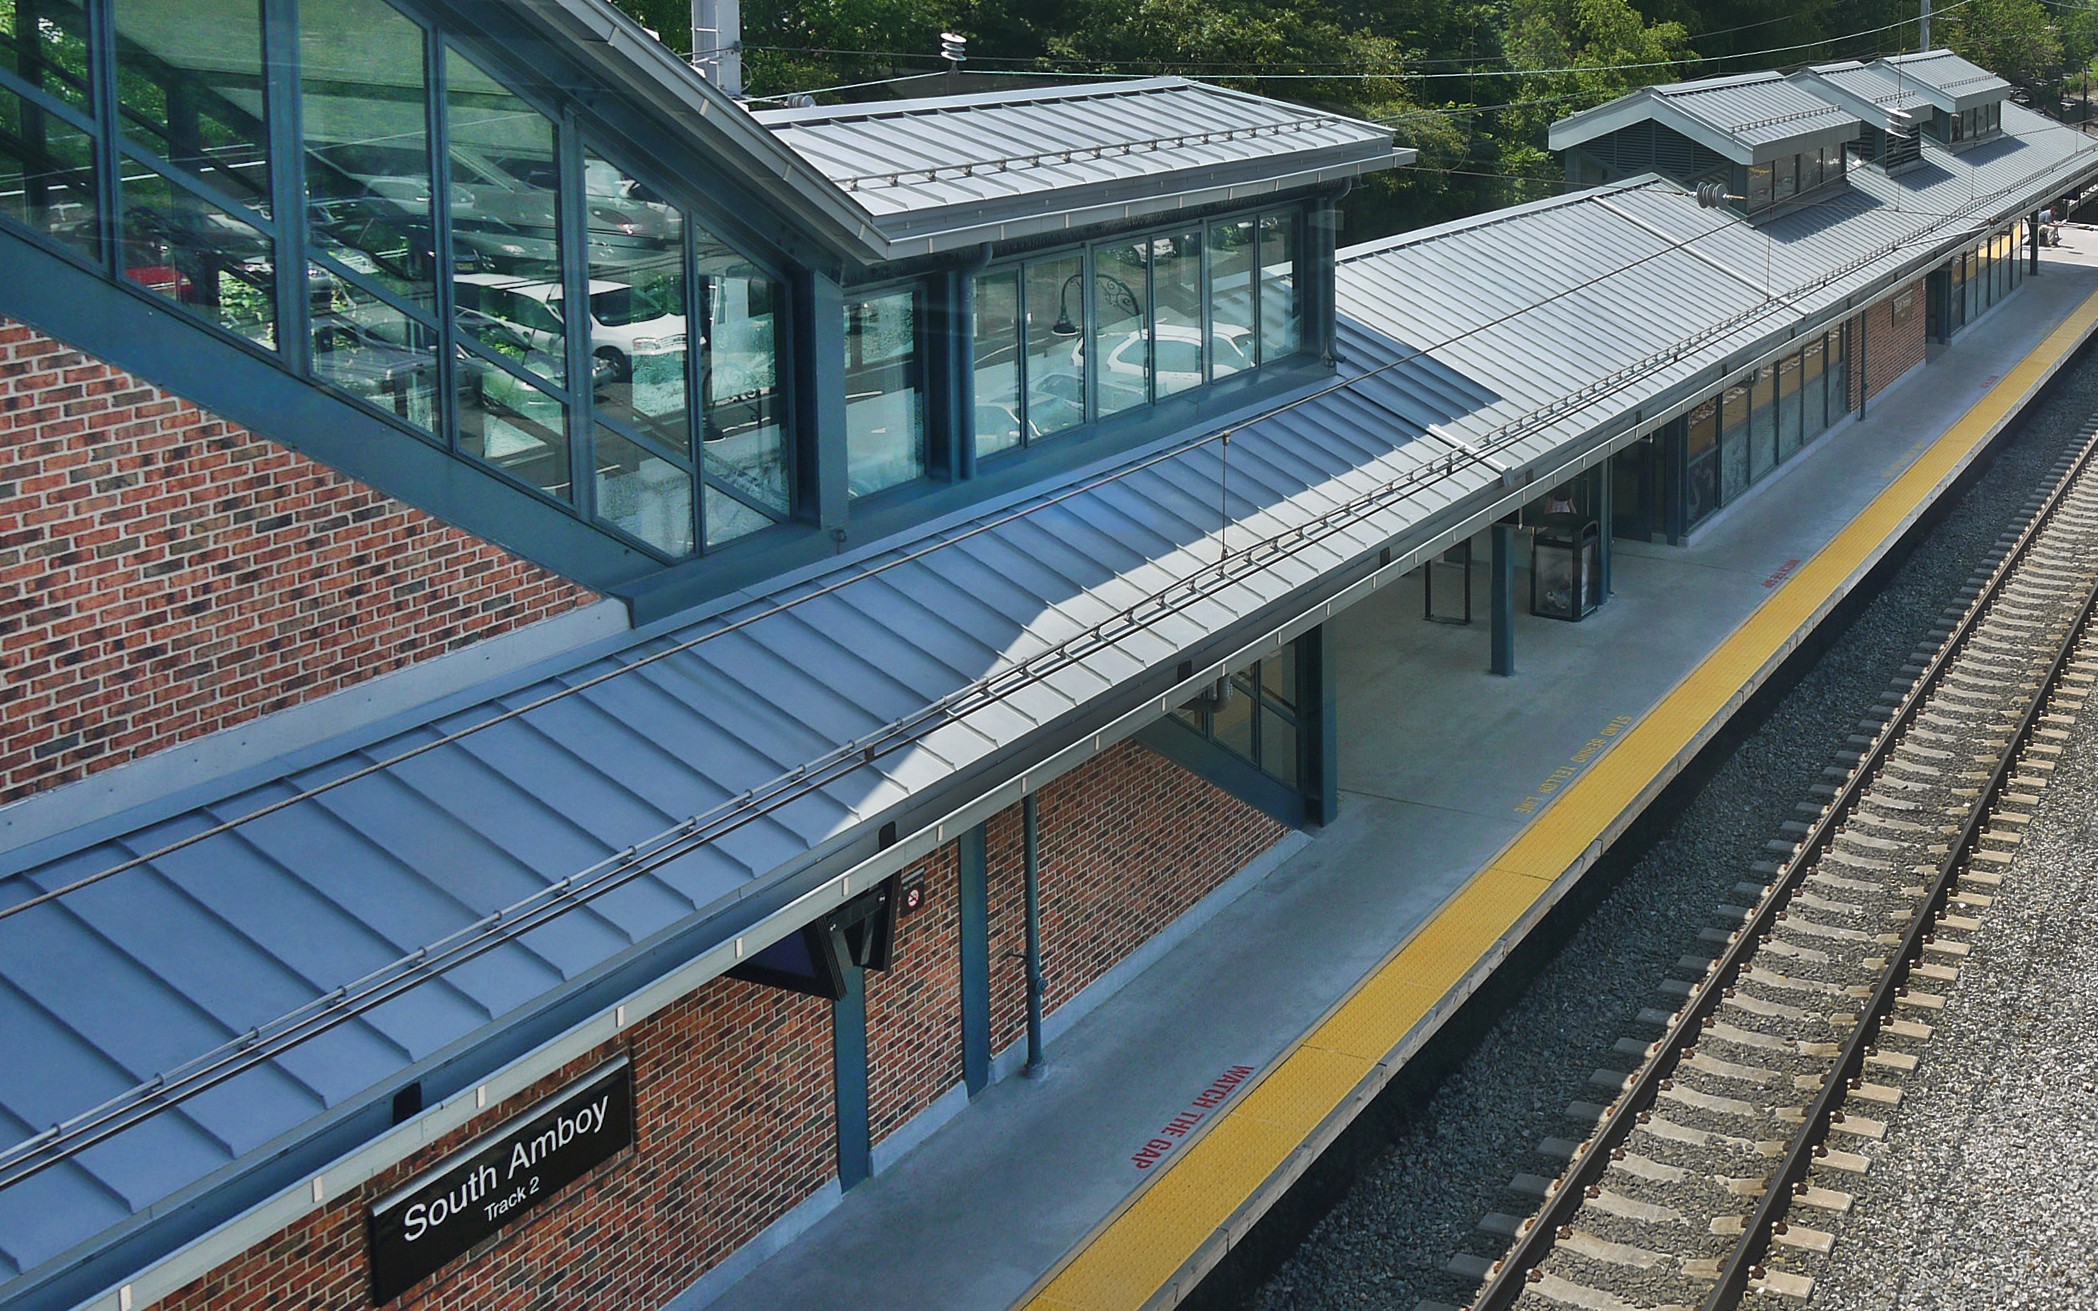 South Amboy Station stairs and platform canopies